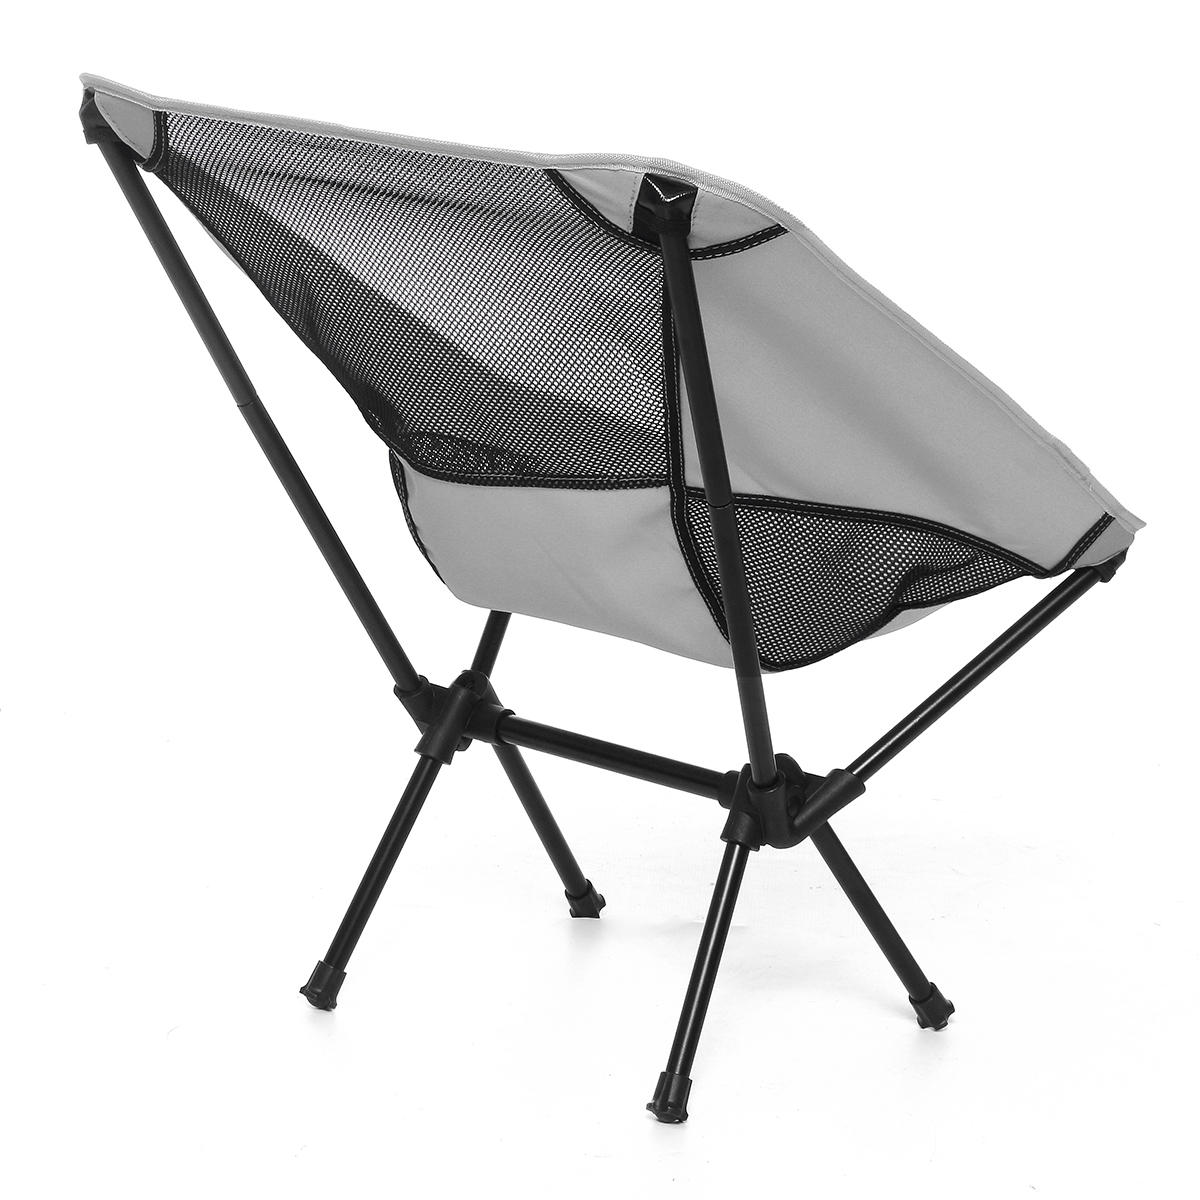 Portable Folding Fishing Chair Outdoor Foldable Camping Chair Collapsible Beach Chair